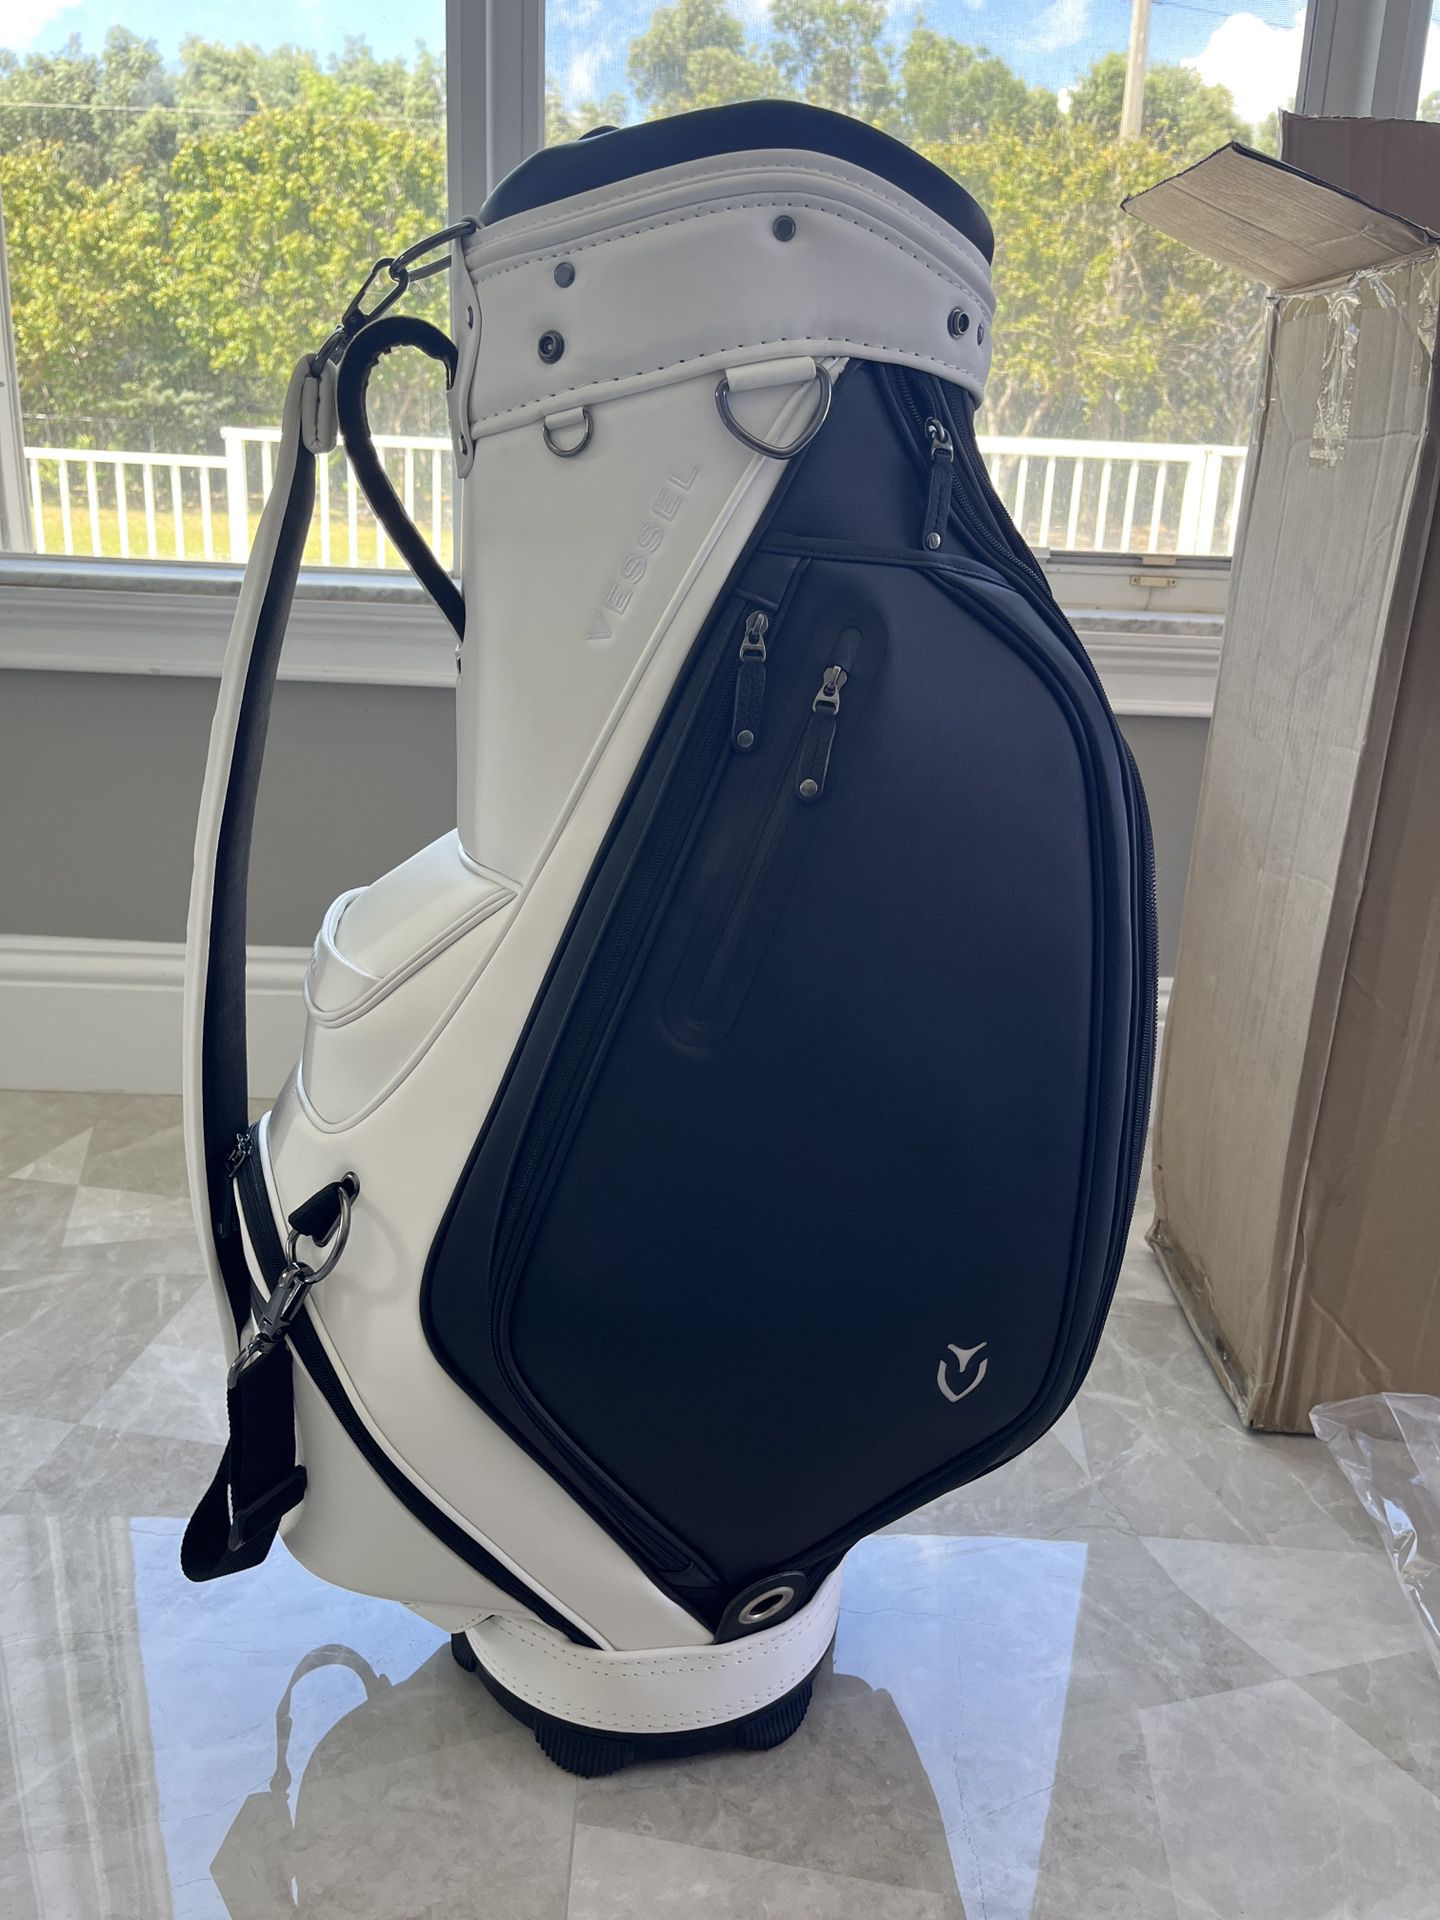 New Vessel Prodigy Mini Staff Bag for Sale in Fort Lauderdale, FL